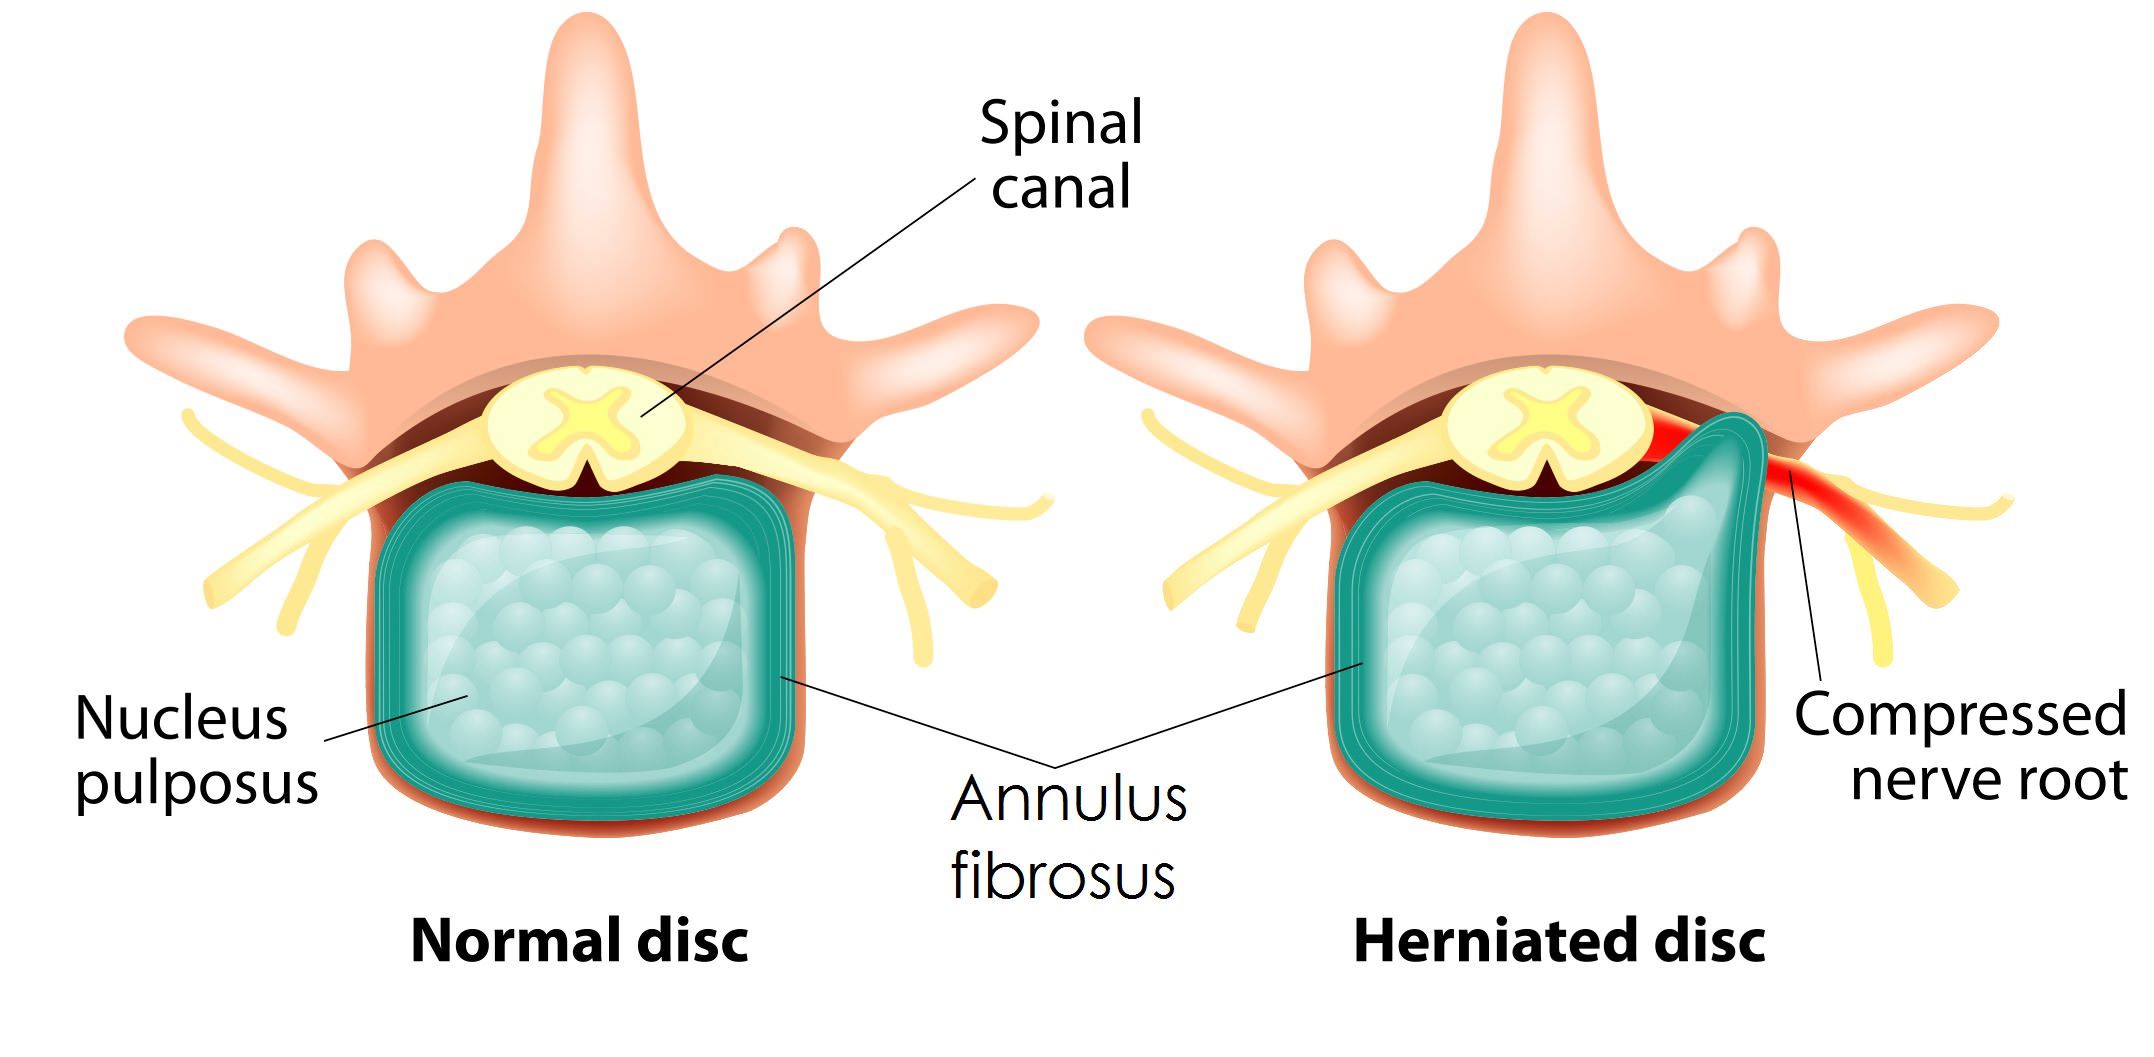 disc herniated sciatica spinal nerve symptoms pain herniation cartilage discs column treatment complications doctors root slipped physio local potential vertebrae